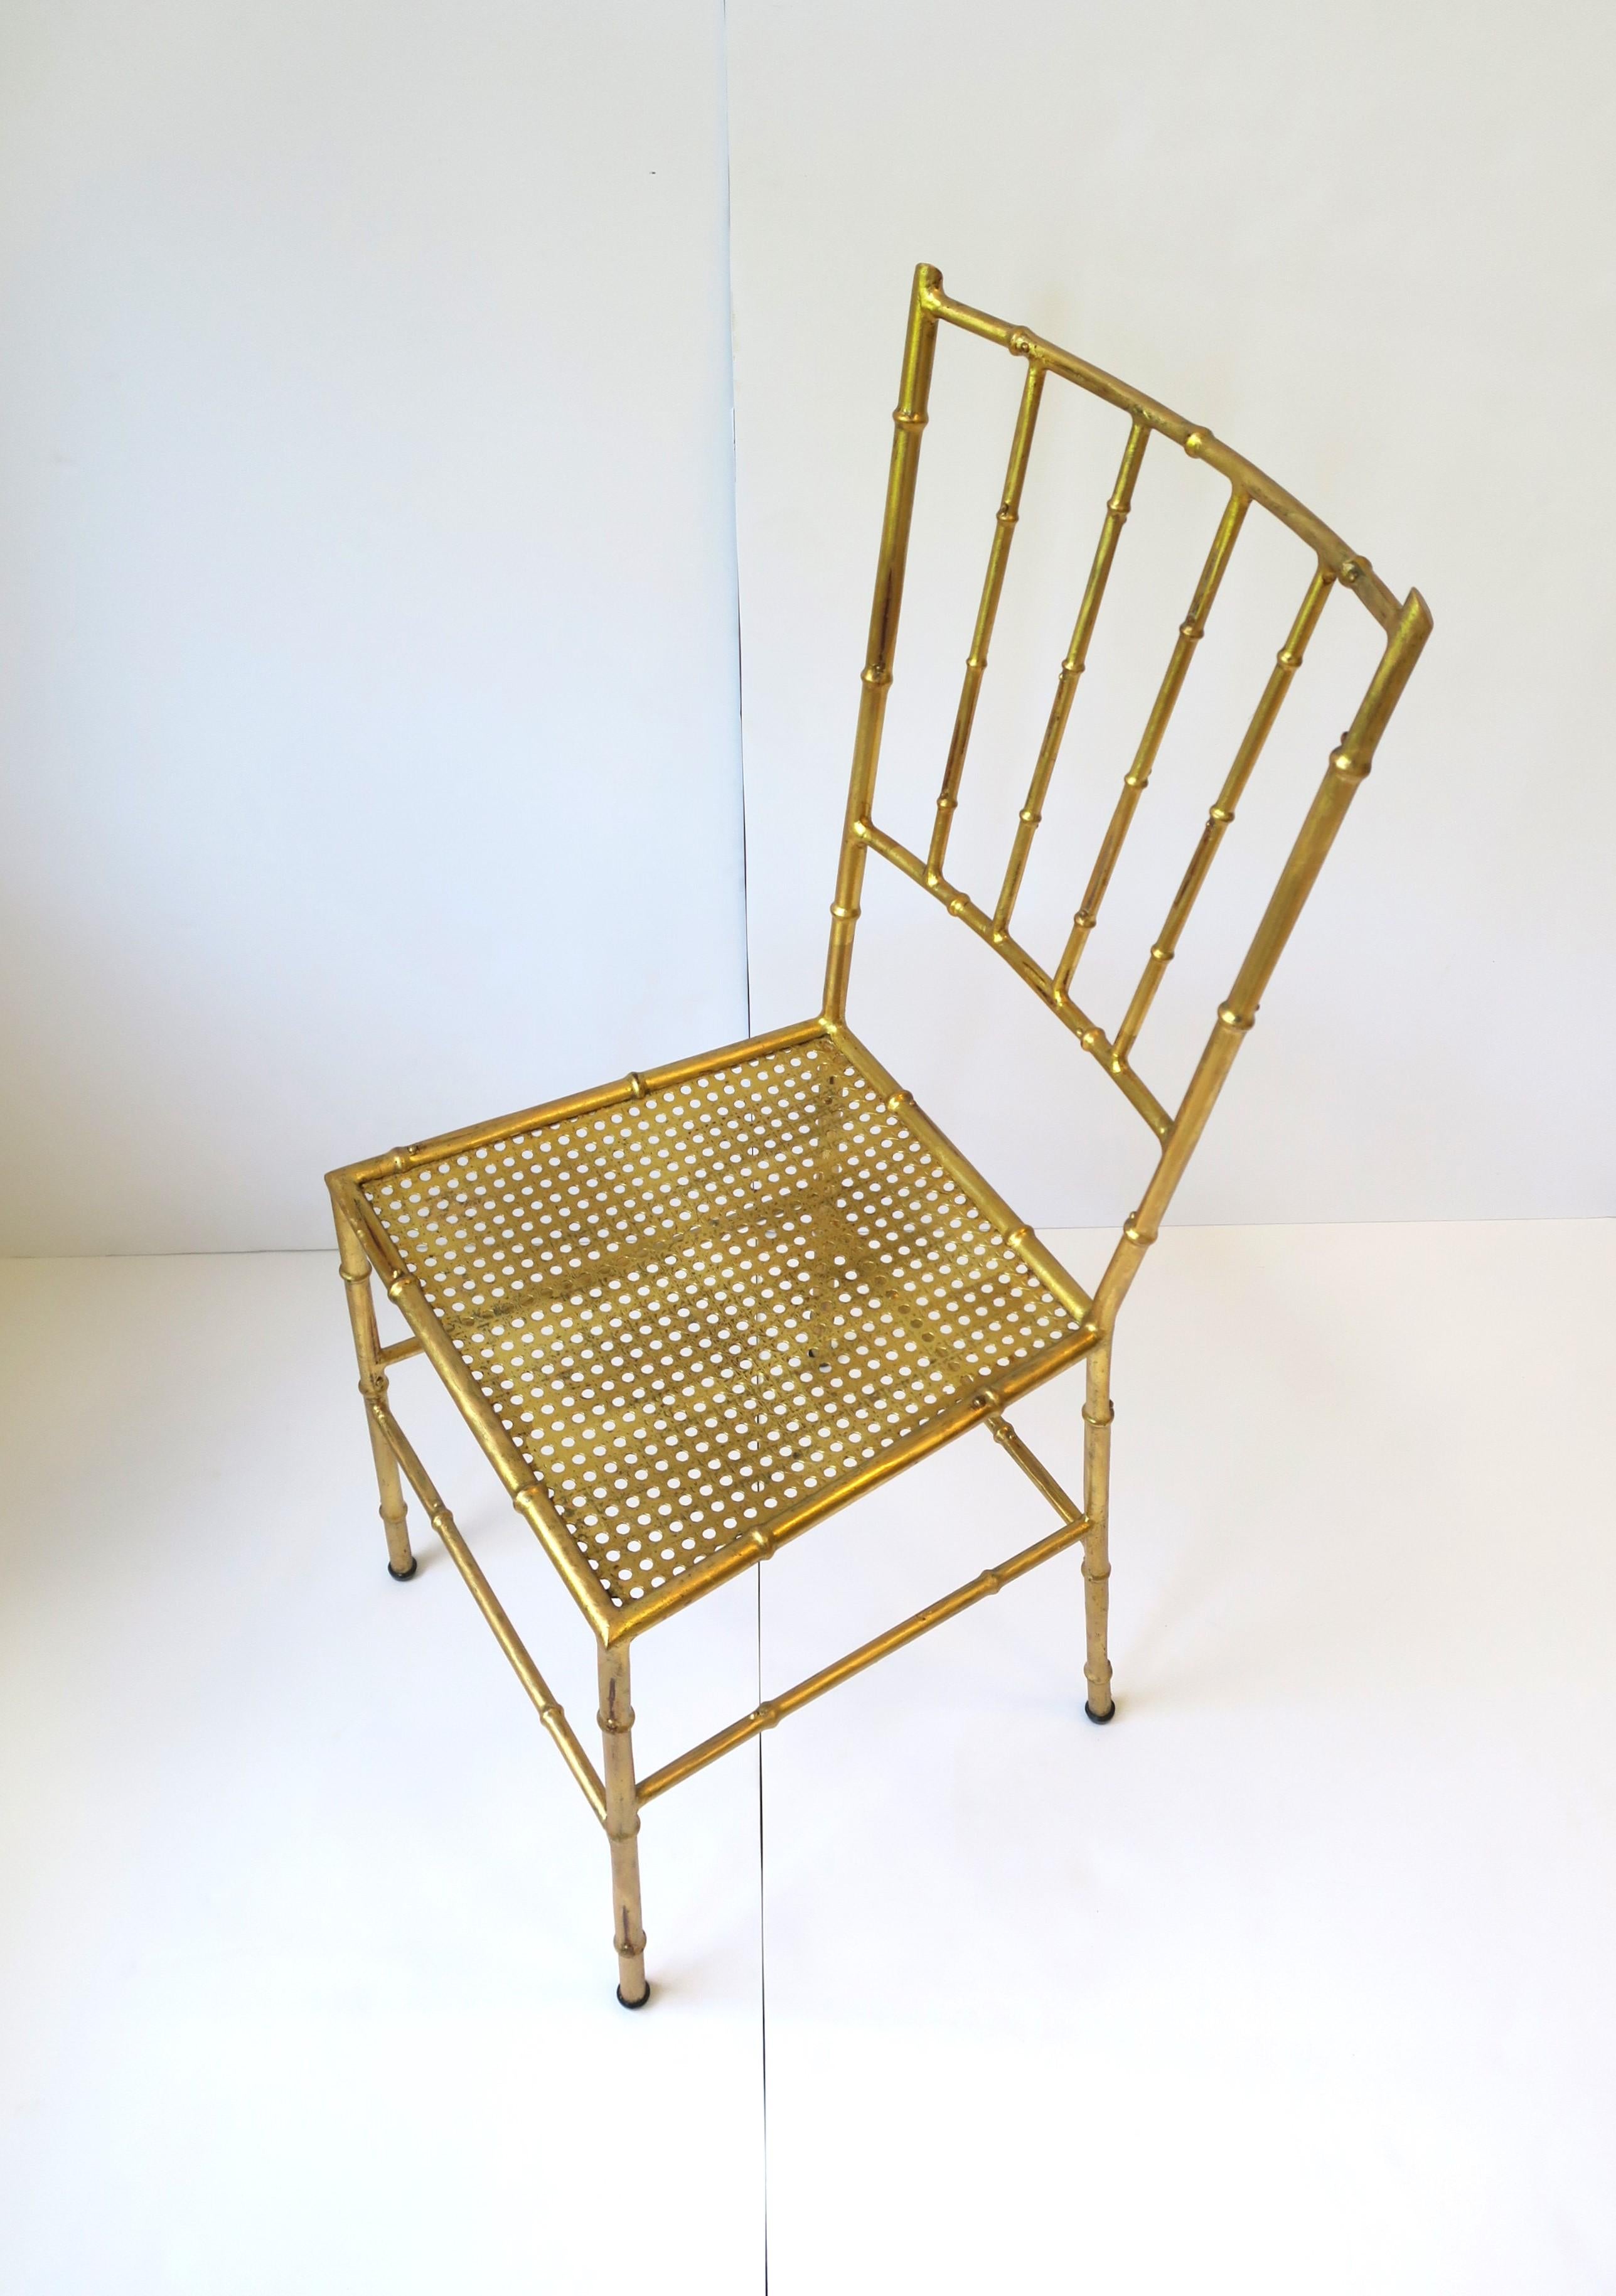 An Italian gold gilt metal cane and bamboo-esque desk, dining or side chair, circa mid-20th century, Italy. Chair has a metal 'bamboo' frame with a metal 'cane' seat finished with gold gilt and a pillow seat cushion (optional.) A great side, hall,